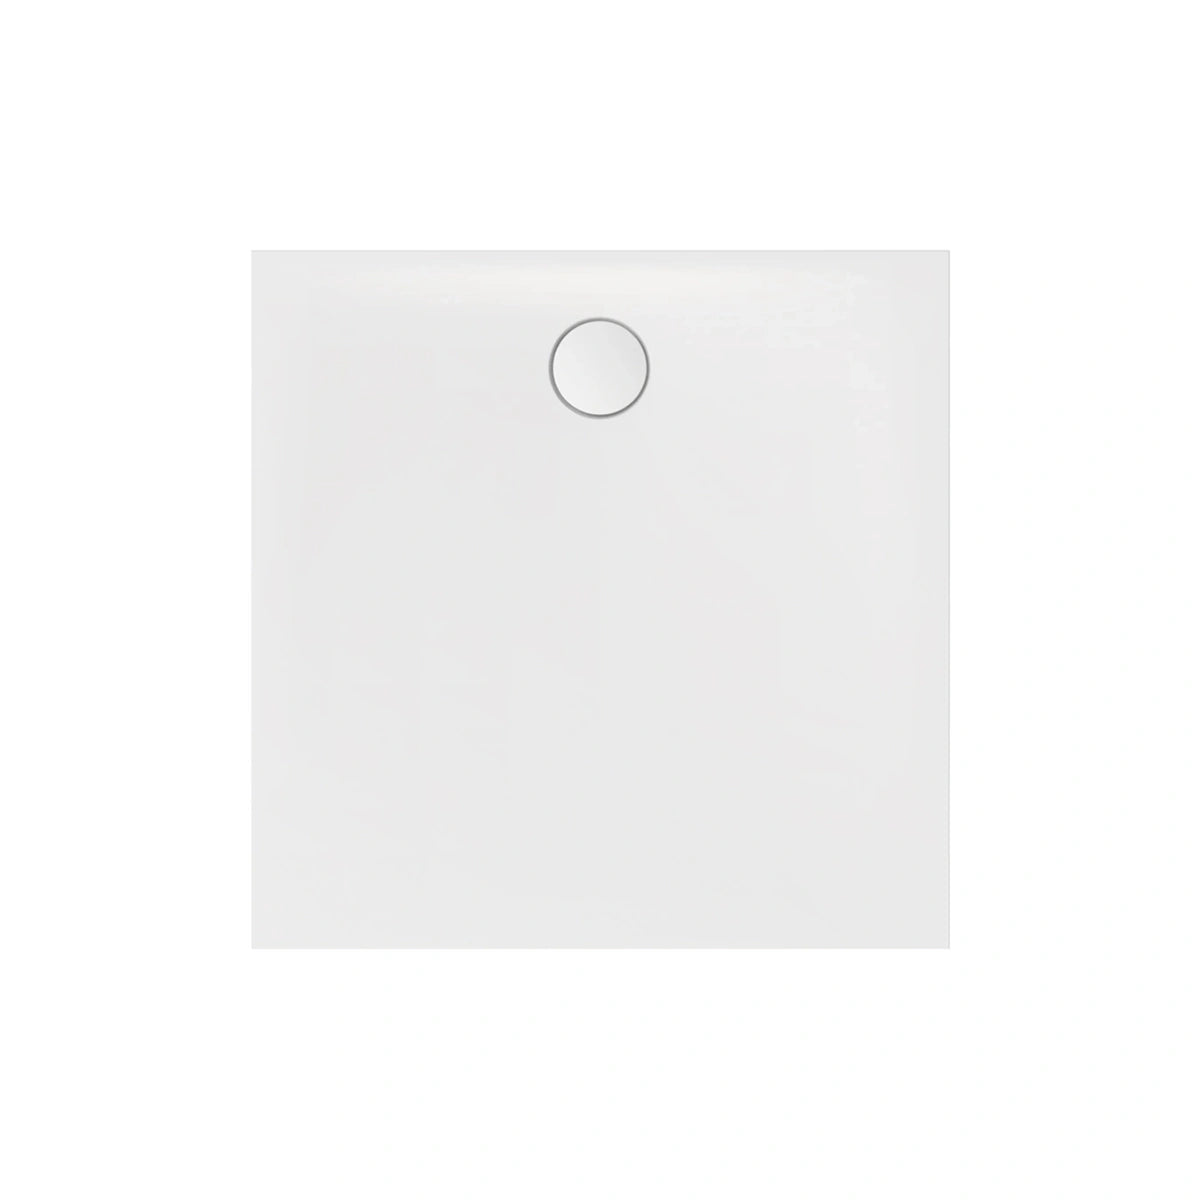 Shower base Shadow - 35.43 in. x 35.43 in. - white structure